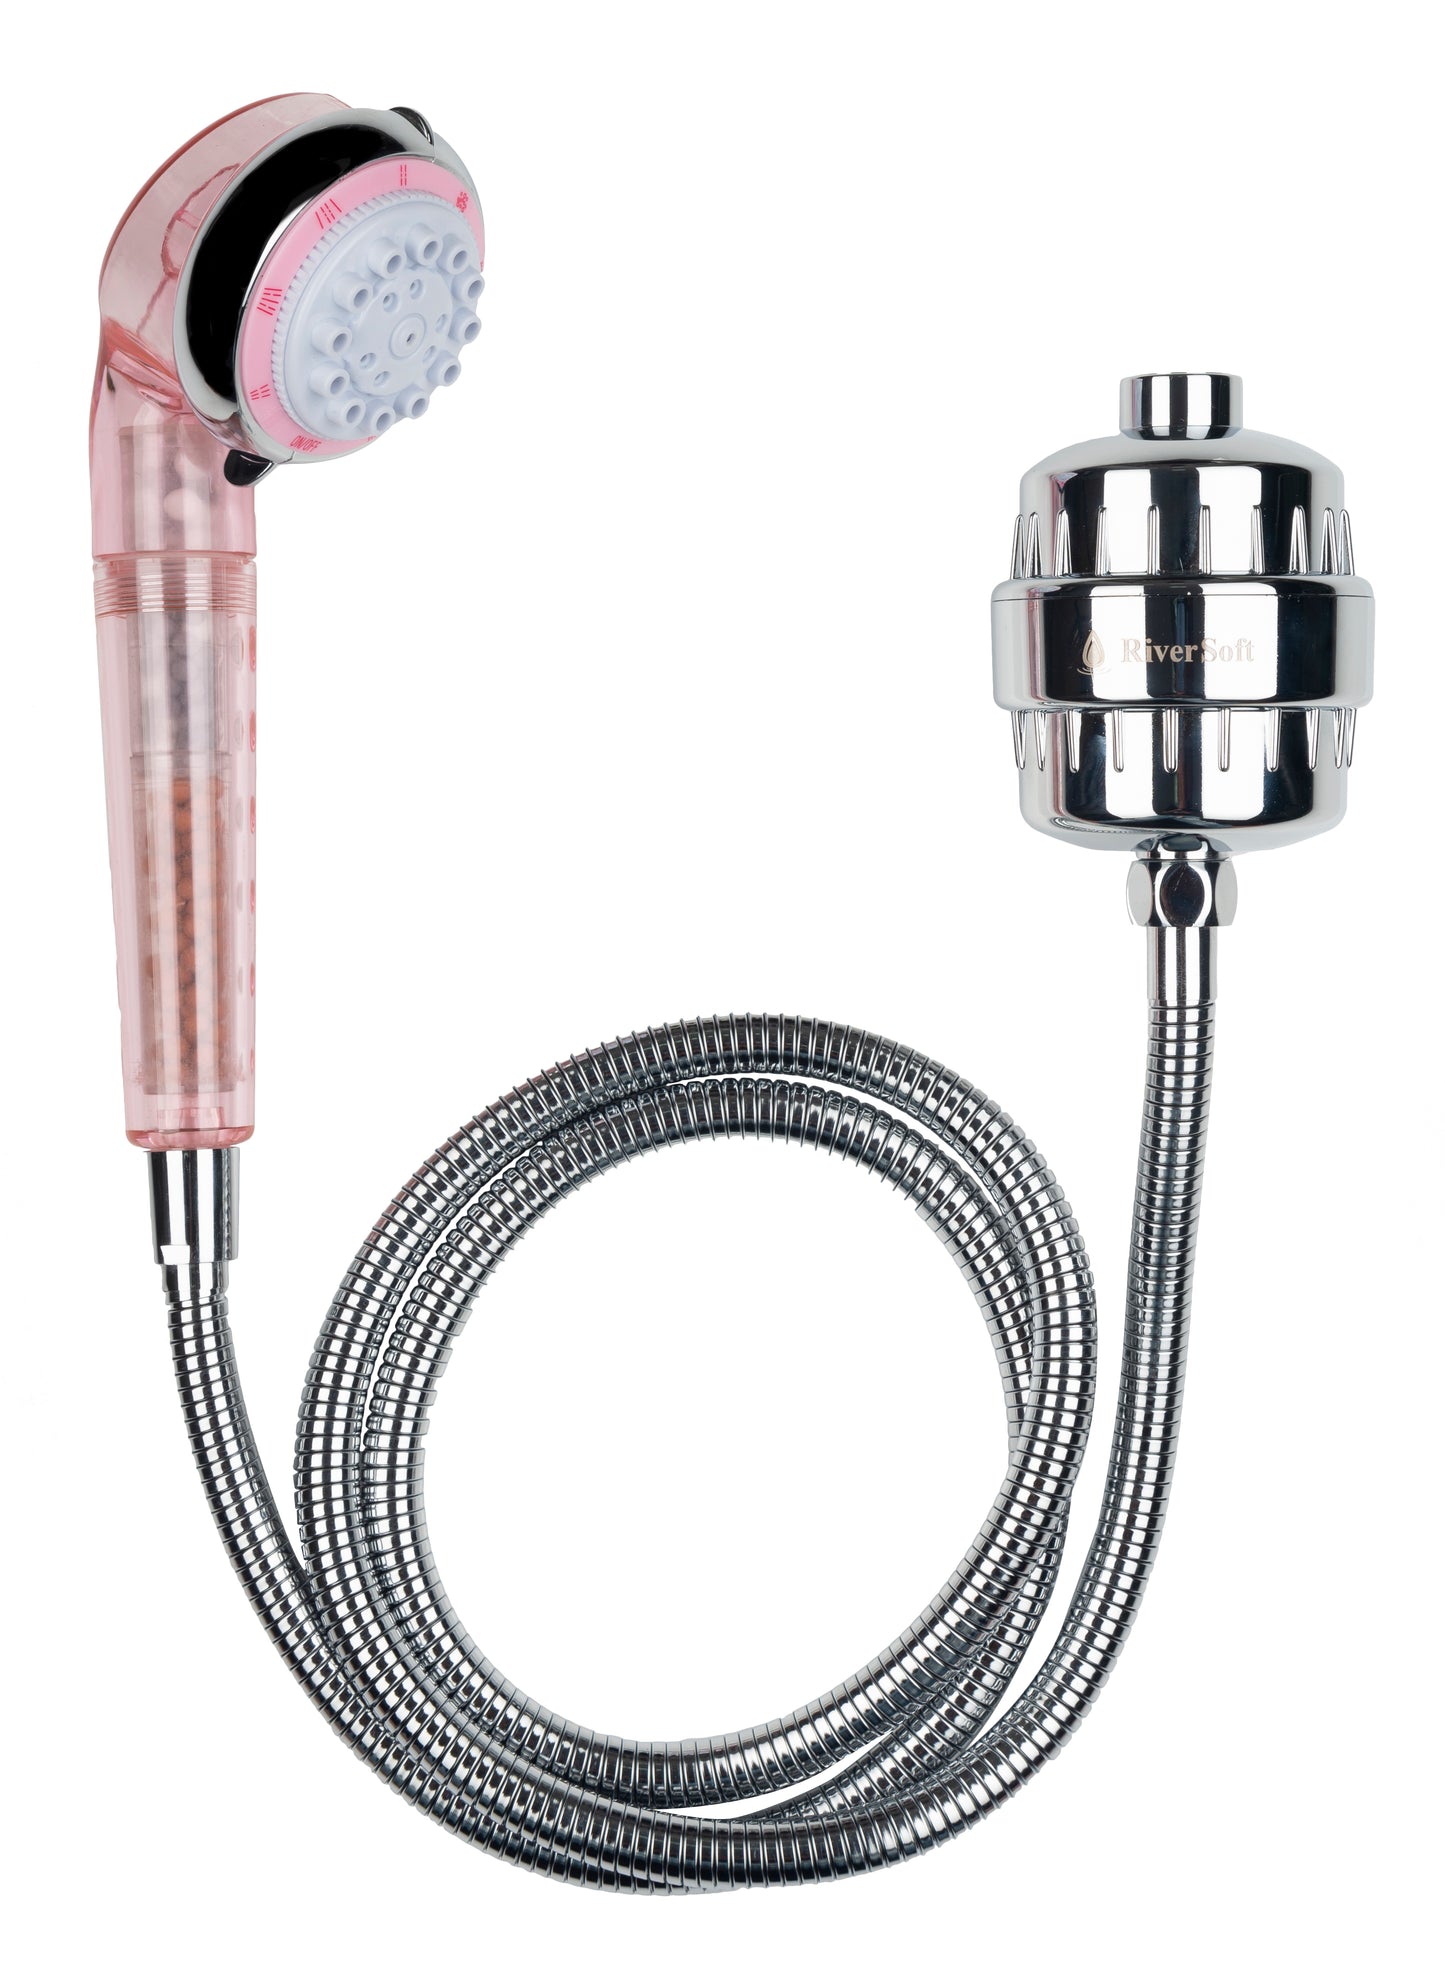 SF-15 shower filter with hand shower, SS Flexible Shower Hose 1.5 Meter | Protect from hard water